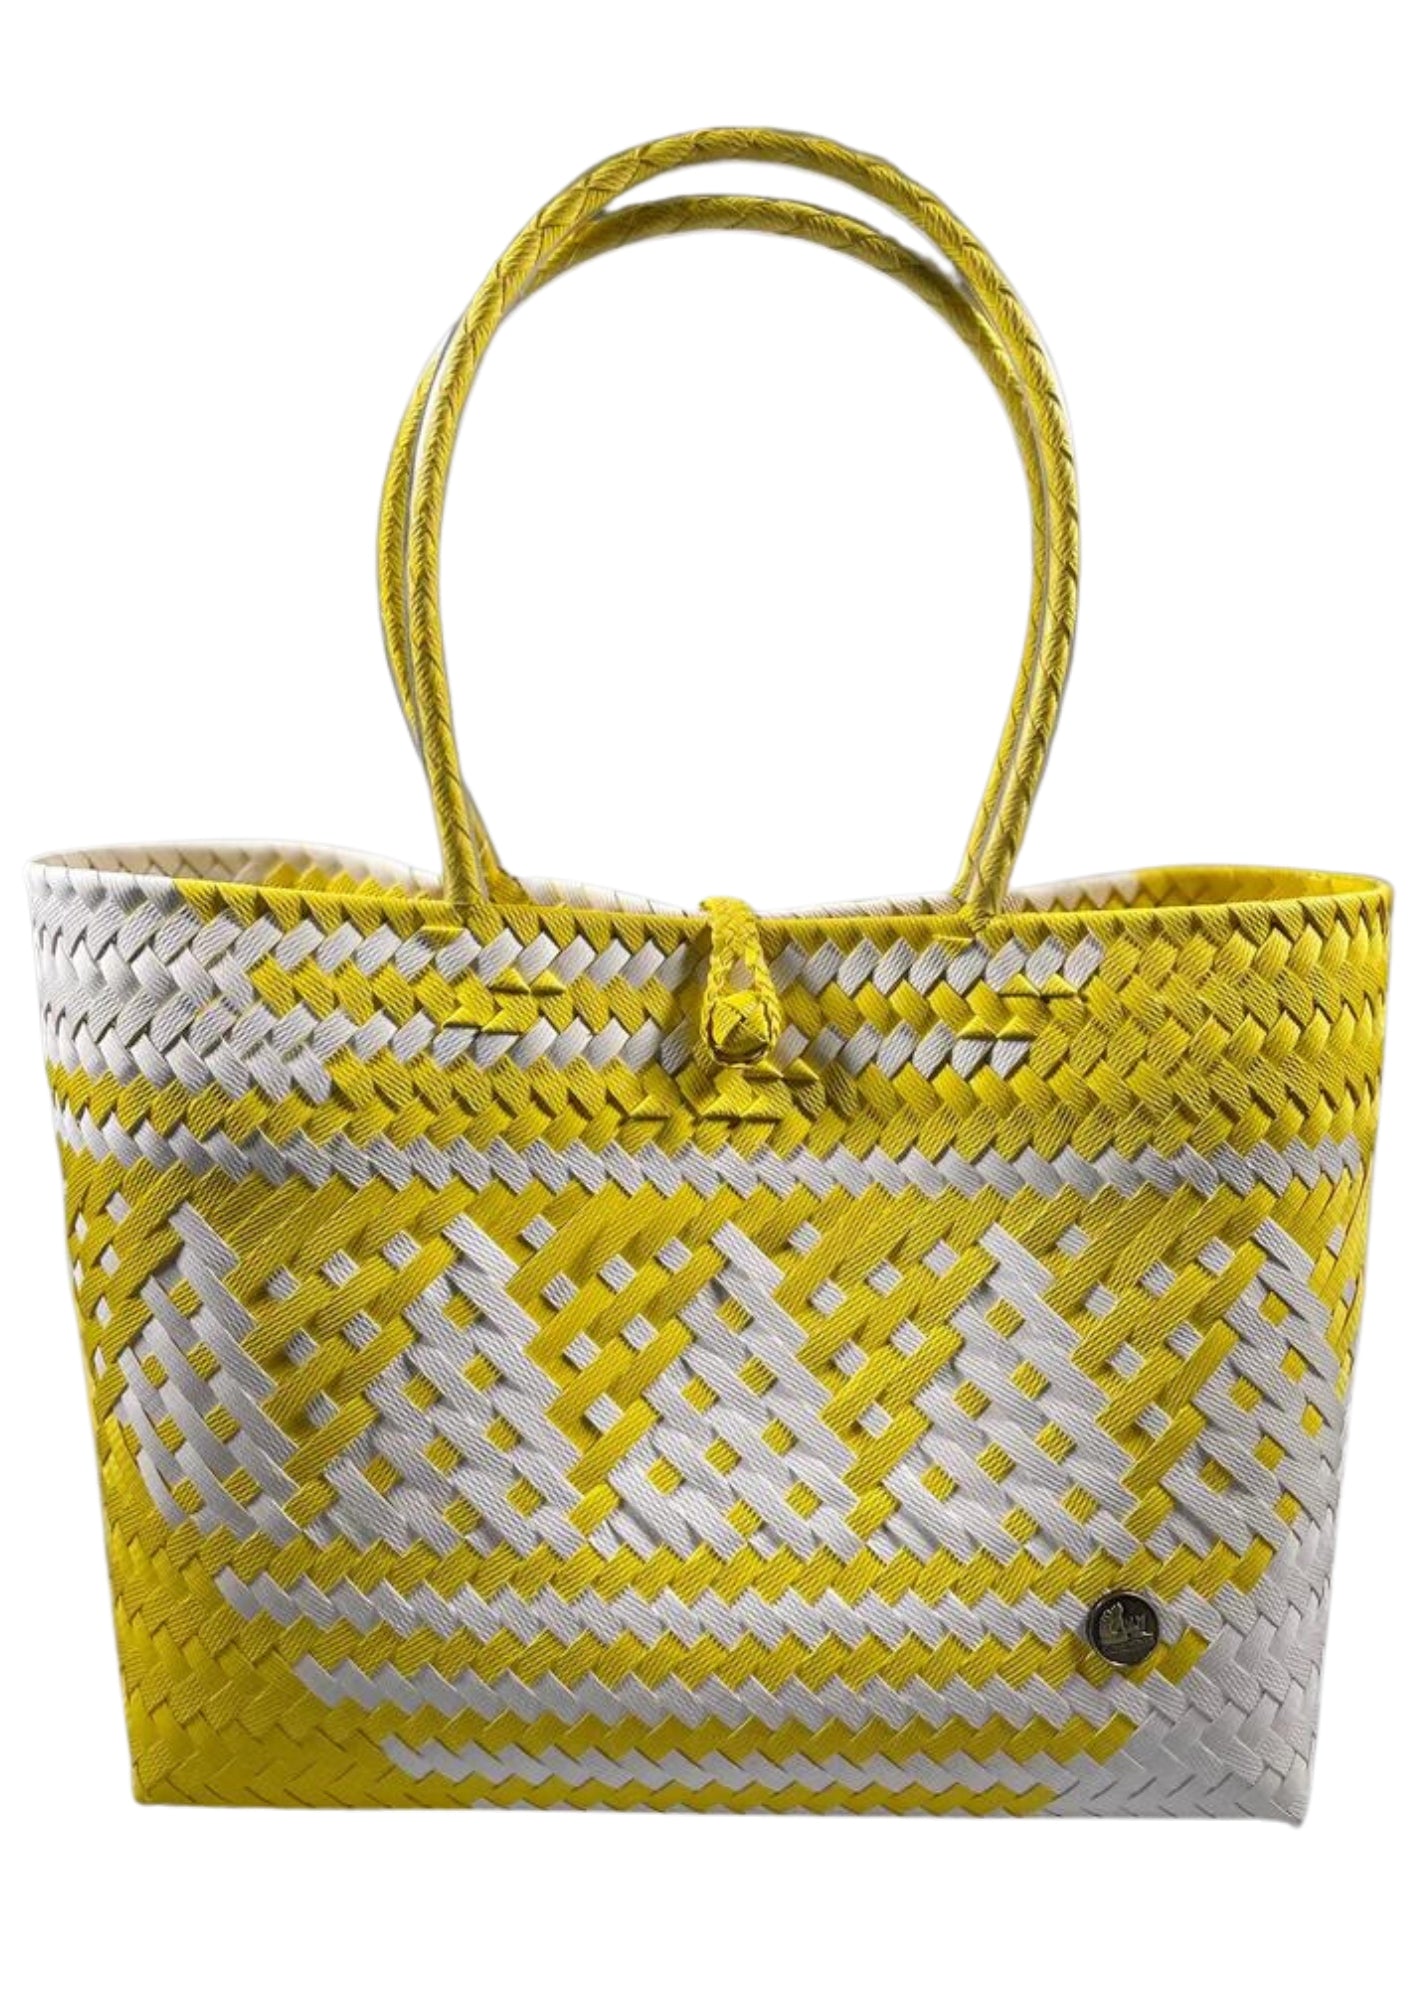 White & Yellow Patterned Bag